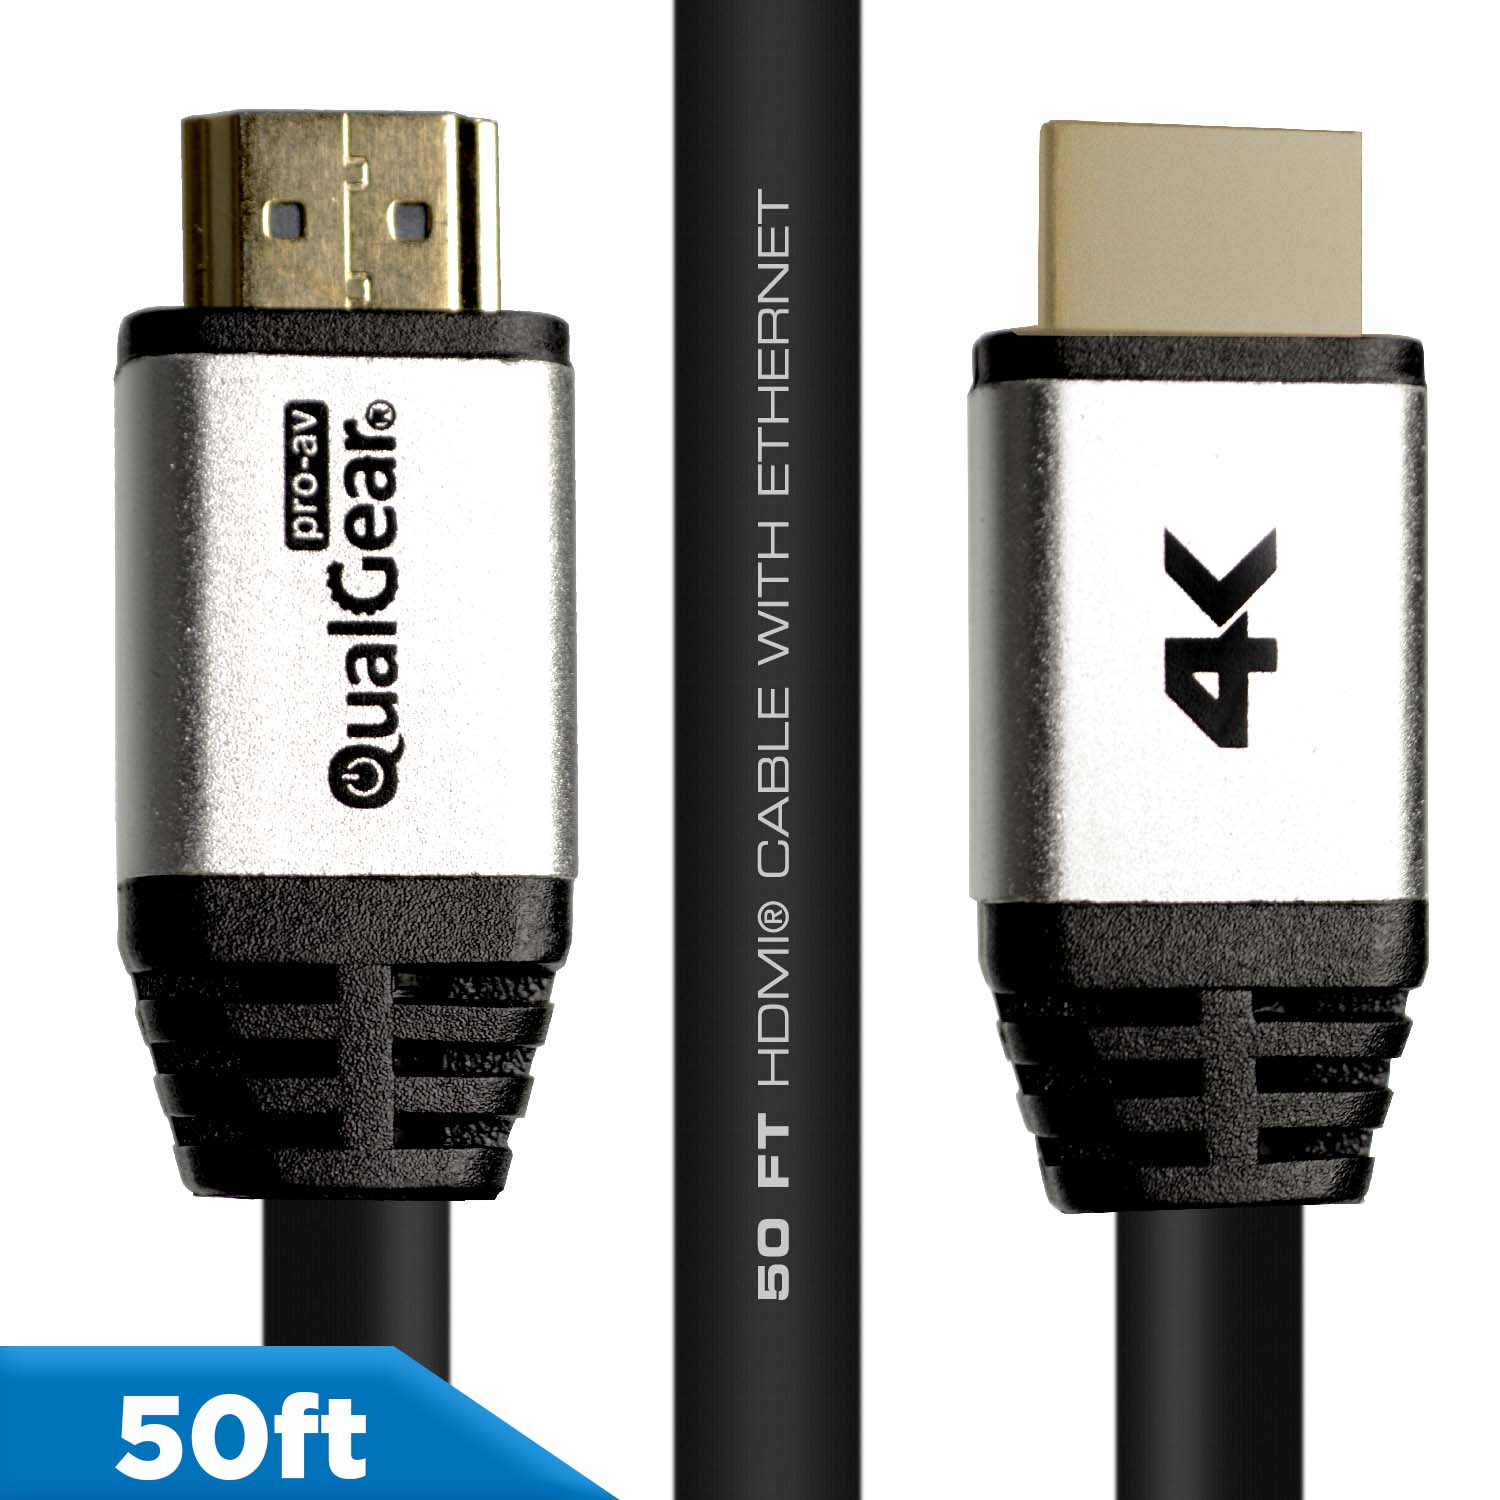 Qualgear 50 Feet High-Speed Long HDMI 2.0 Cable with 24K Gold Plated Contacts, Supports 4K Ultra HD, 3D, 18 Gbps, Audio Return Channel,CL3 Rated for In-Wall Use (QG-CBL-HD20-50FT)